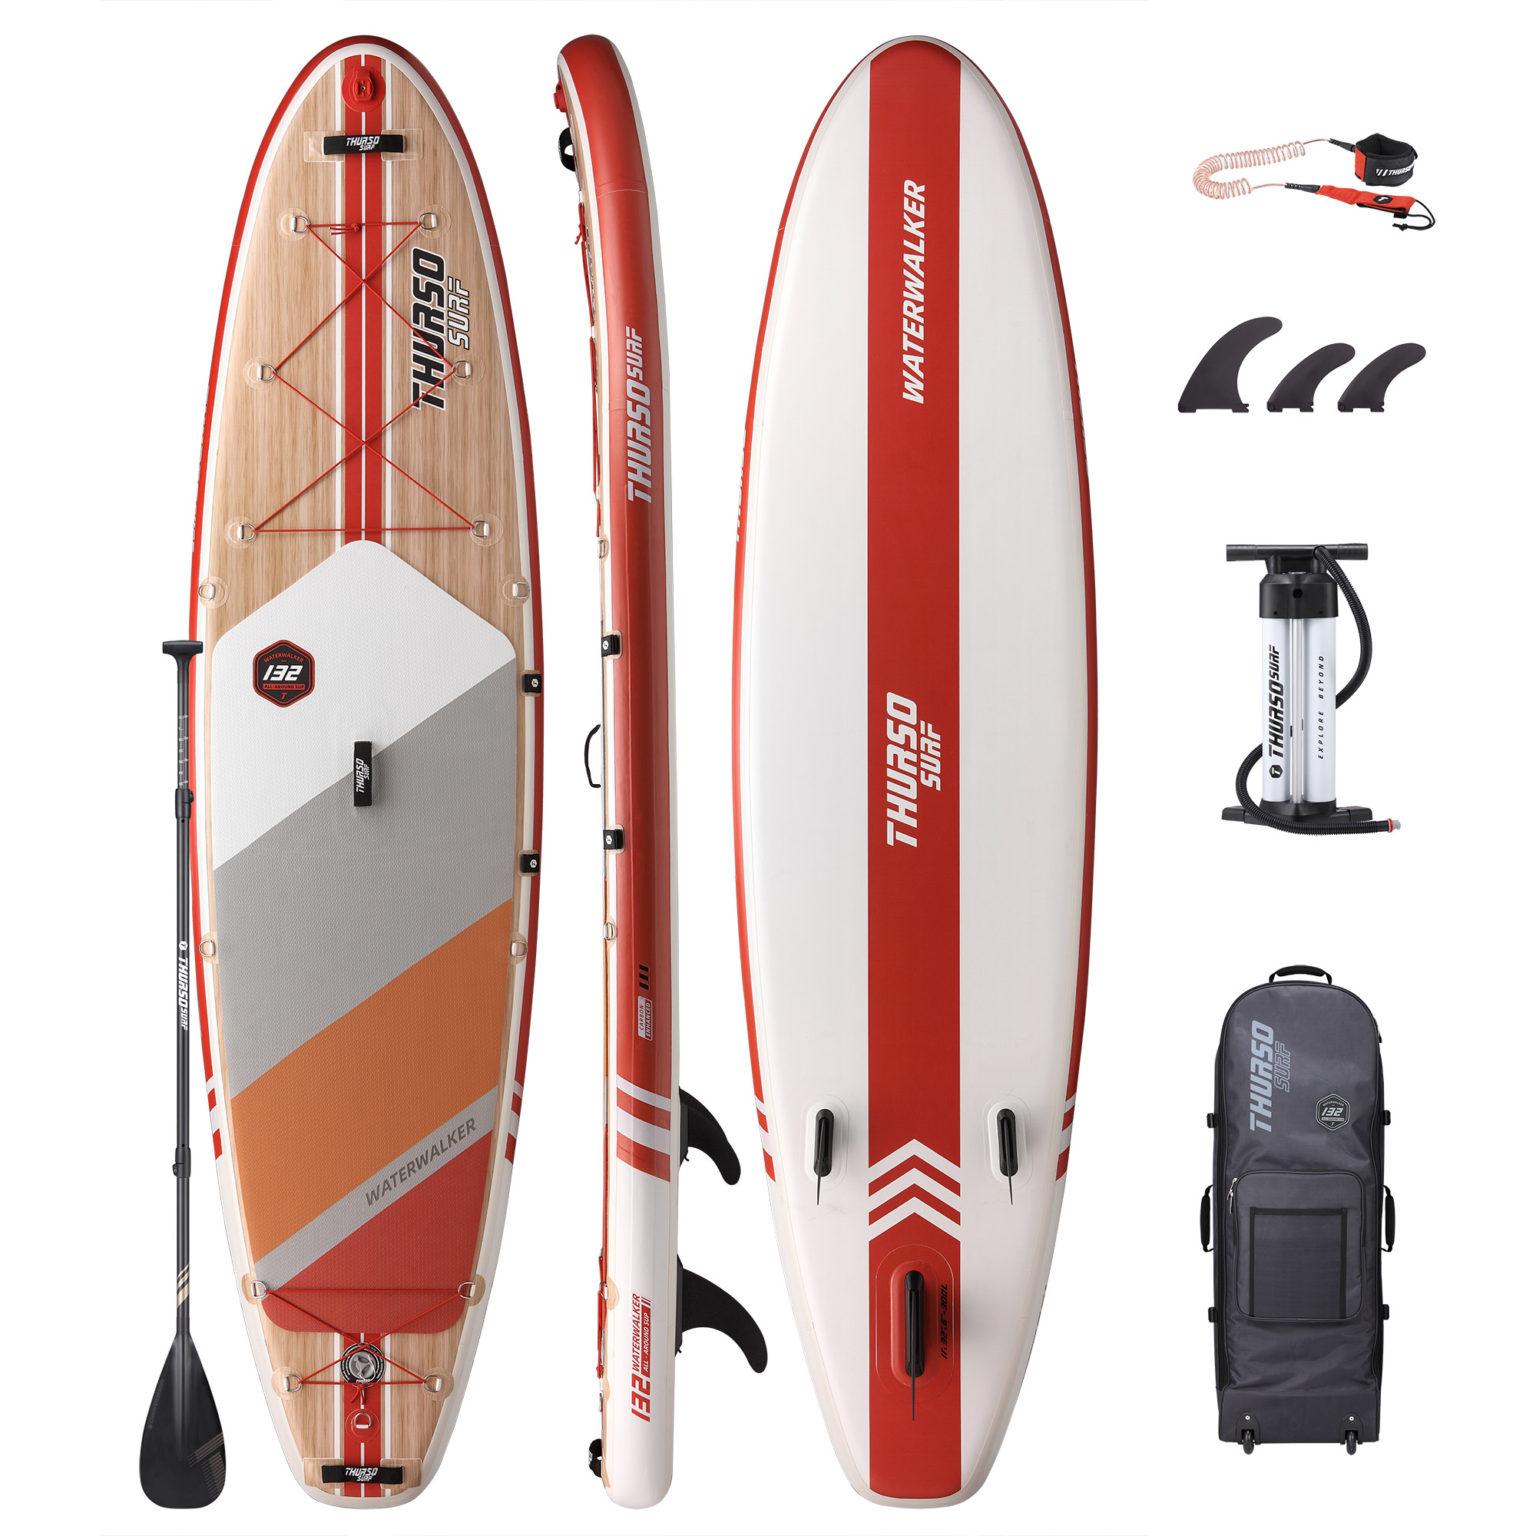 THURSO SURF UK - Stand Up Paddle Boards Built to Explore Beyond